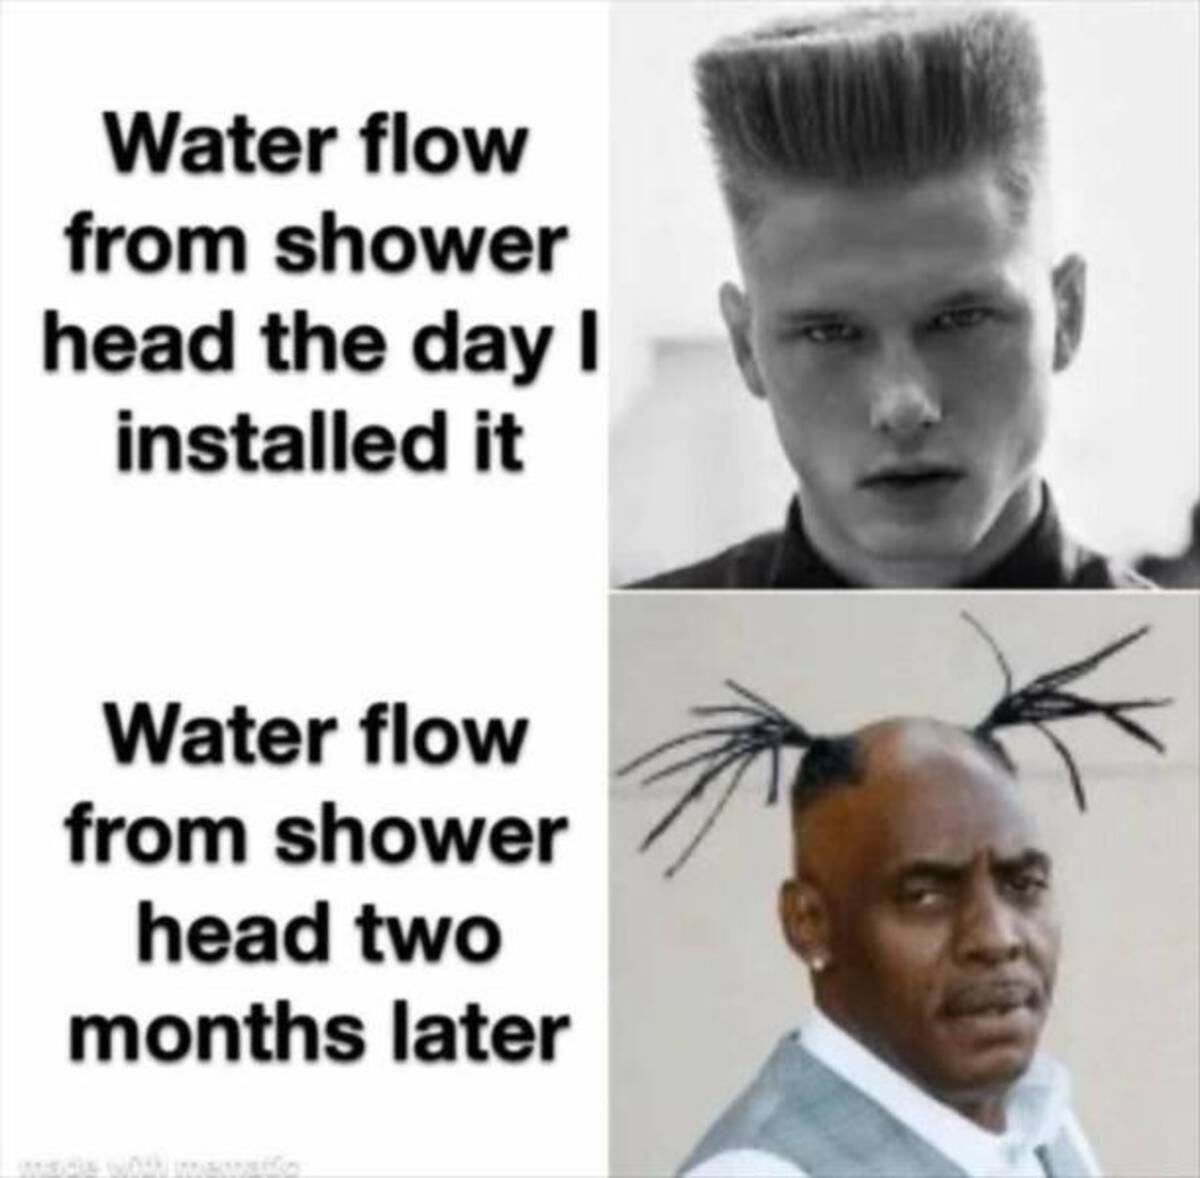 toothbrush memes - Water flow from shower head the day I installed it Water flow from shower head two months later